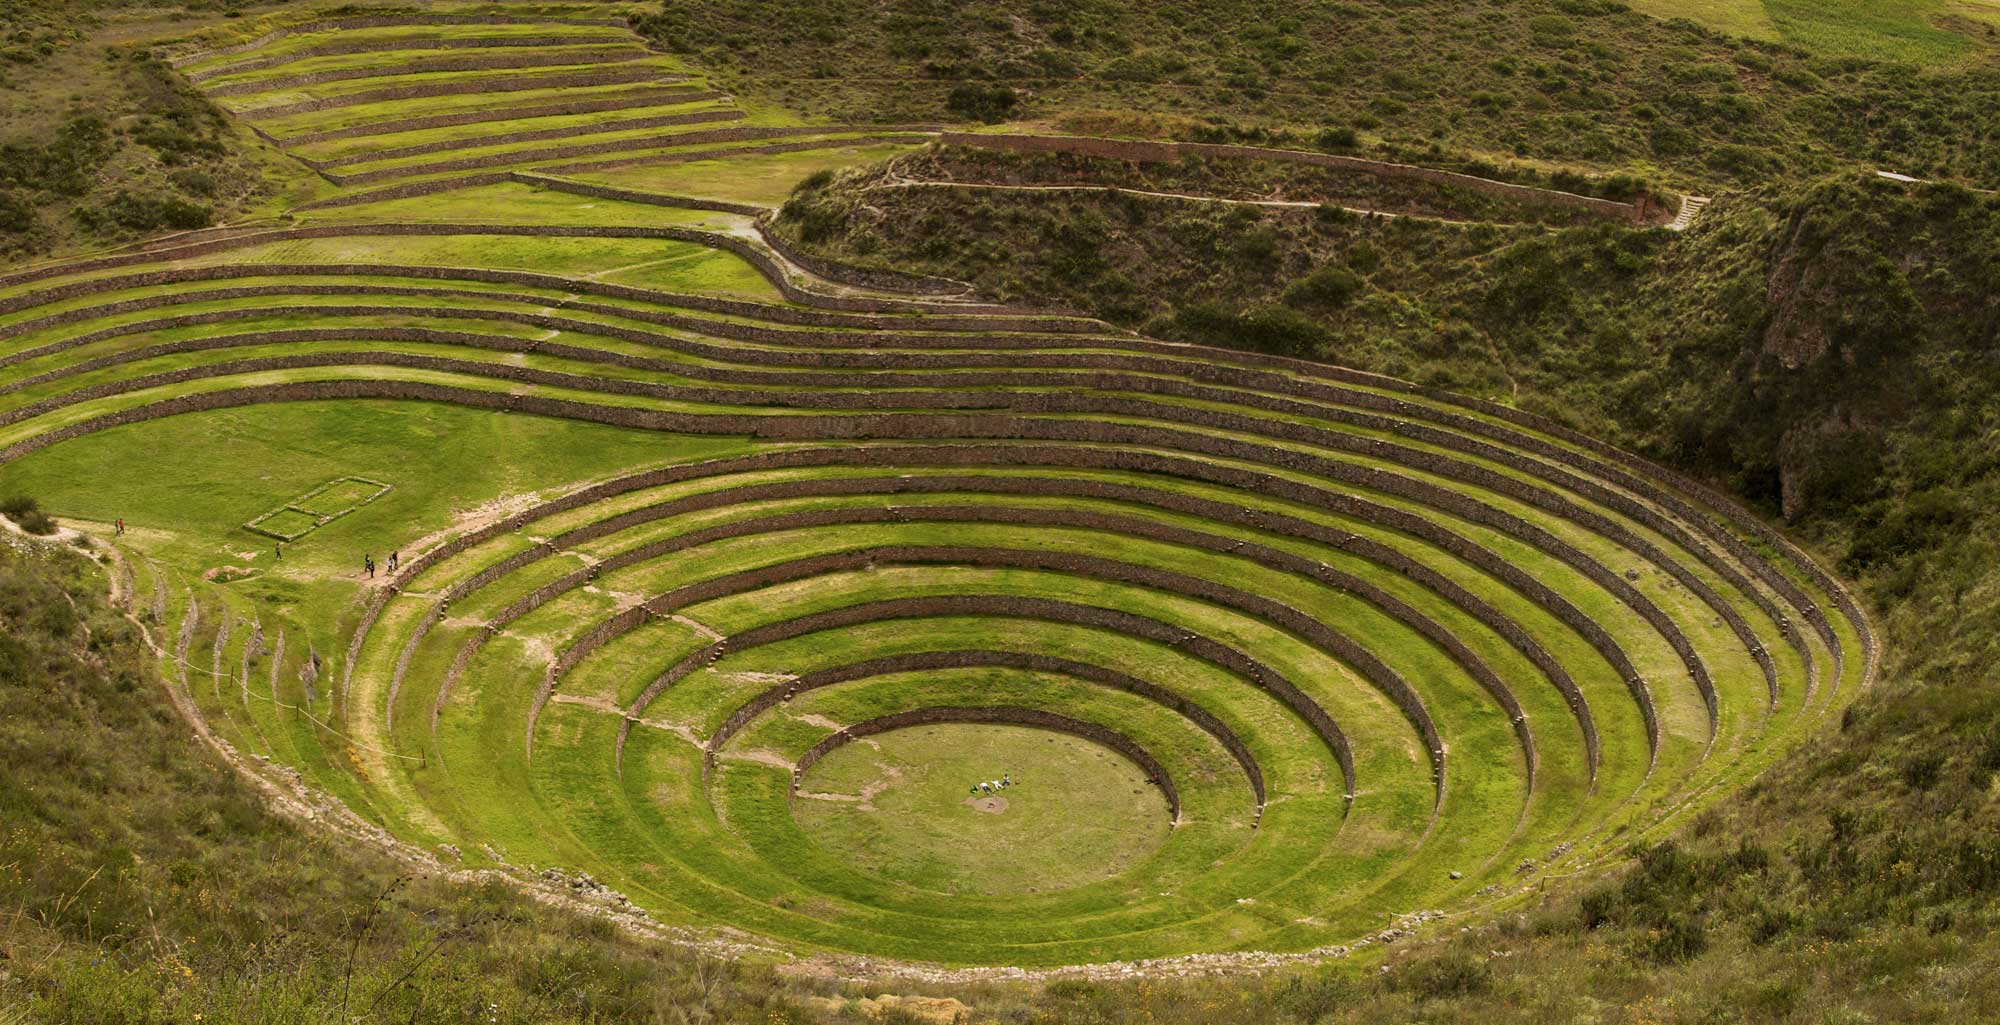 Photograph of a terraced field built by the Incas. The photo shows a field of concentric circular steps, with the central circle the lowest and the outer rings the highest.